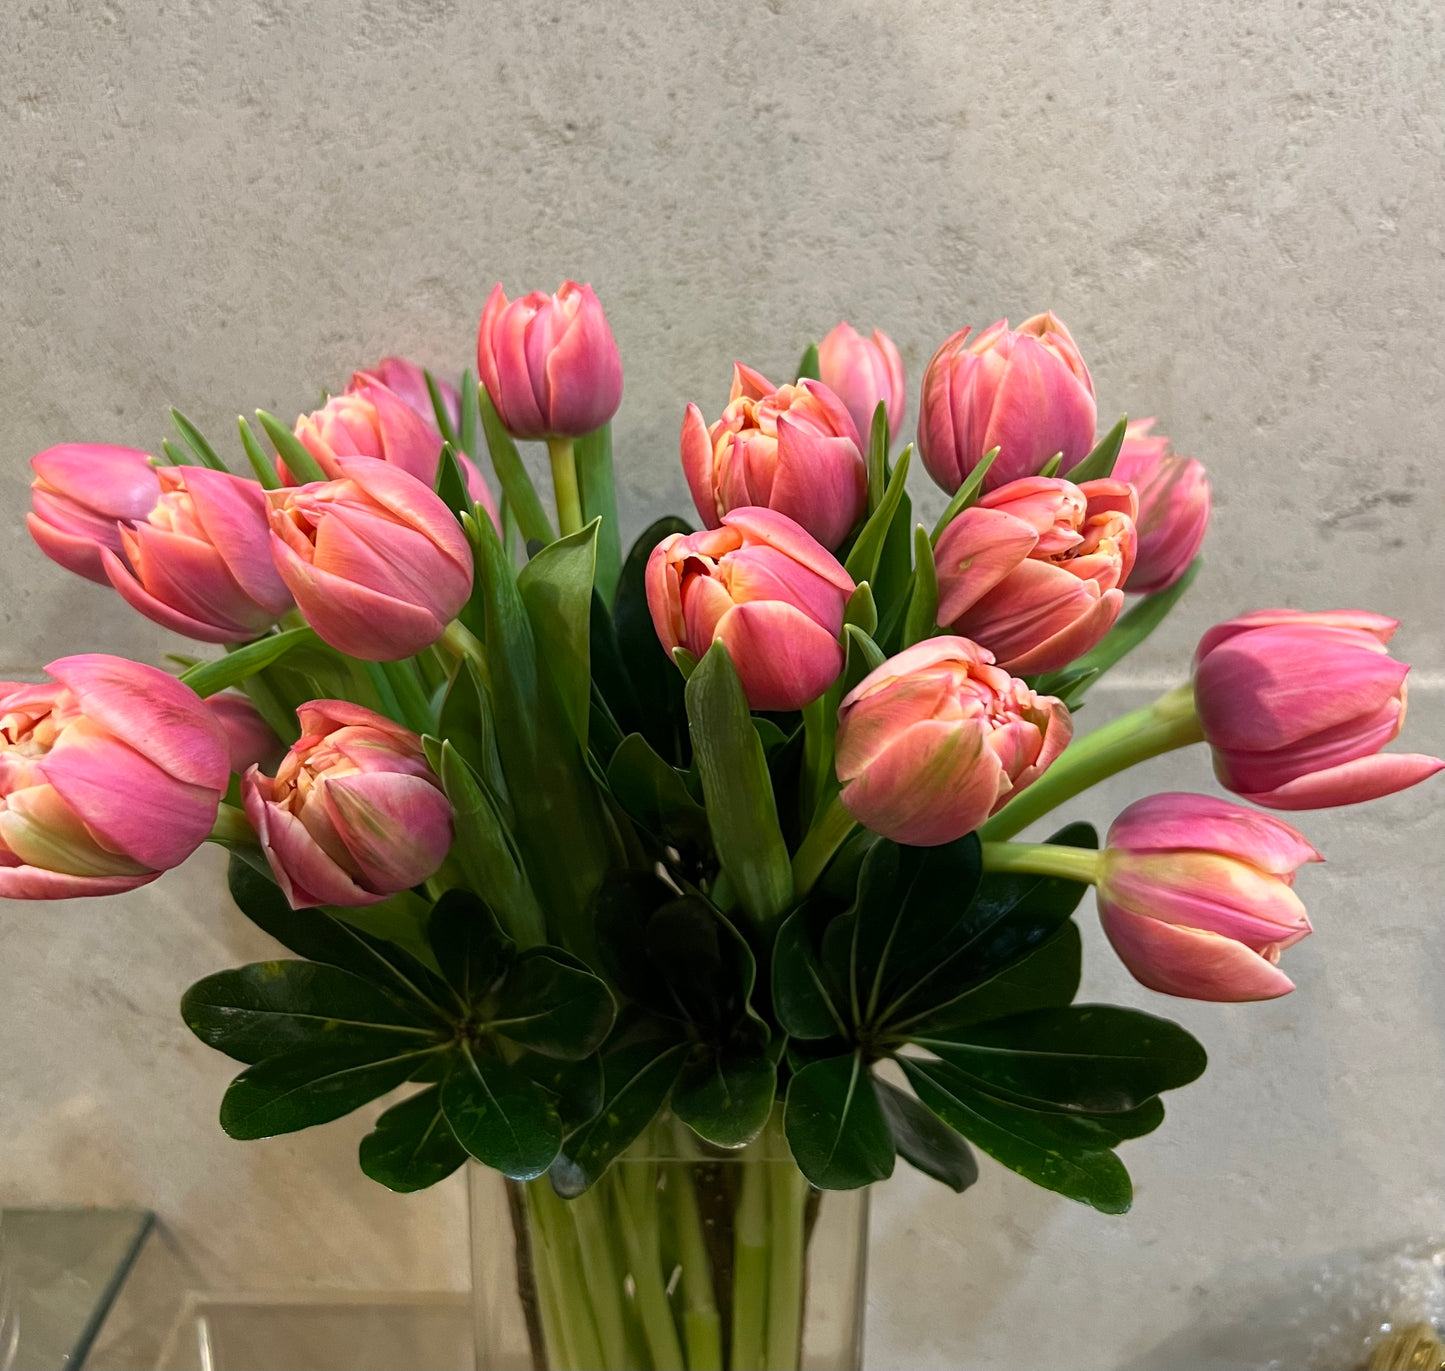 Coral pink double tulips